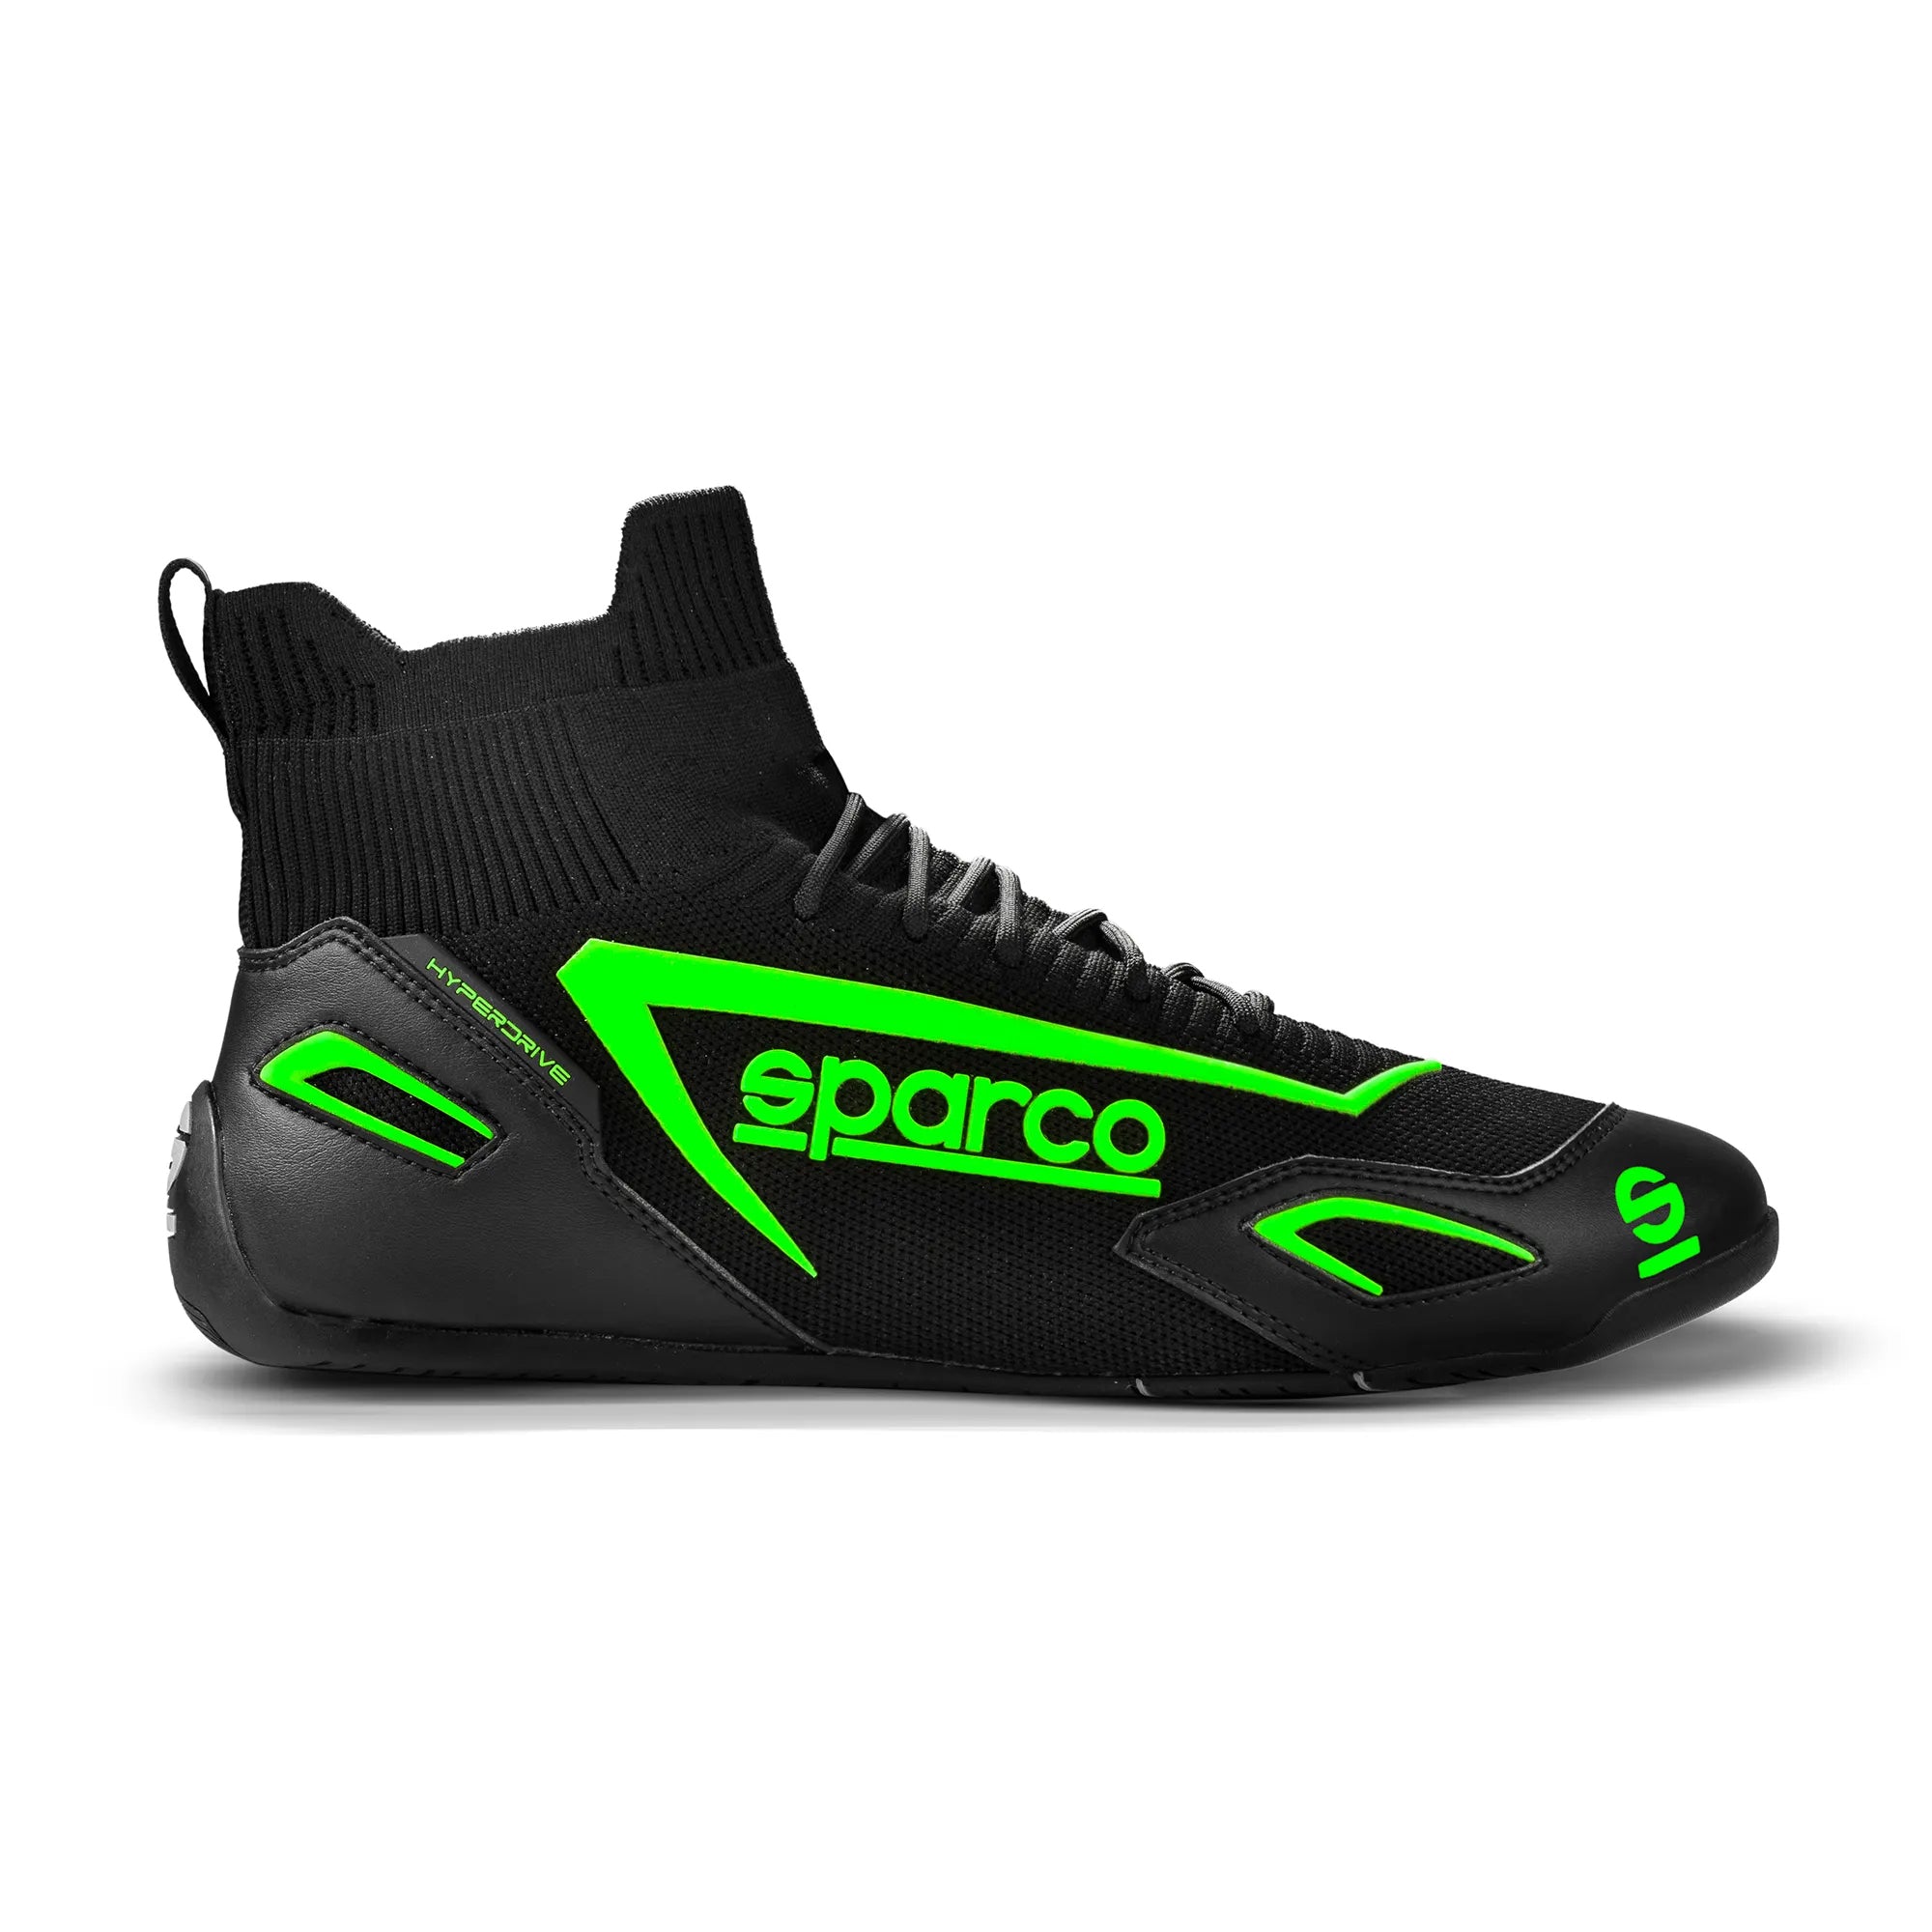 SPARCO 00129342NRVF Gaming sim racing shoes HYPERDRIVE, black/green, size 42 Photo-0 